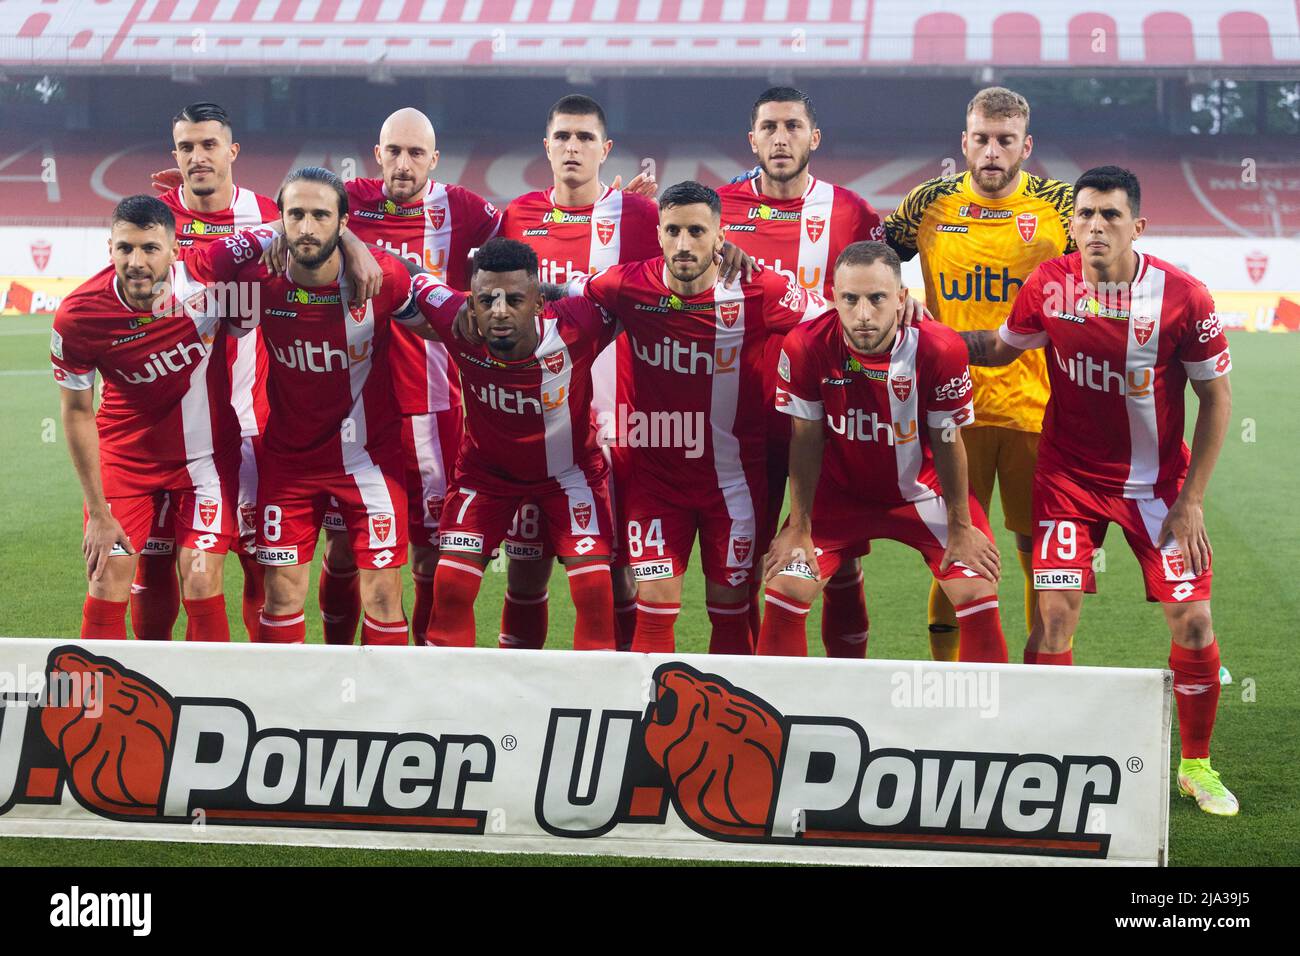 Monza, Italy. 26th May, 2022. AC Monza players pose for a photo prior the  Serie B match between Ac Monza and Pisa Sc at U Power Stadium on May 26,  2022 in